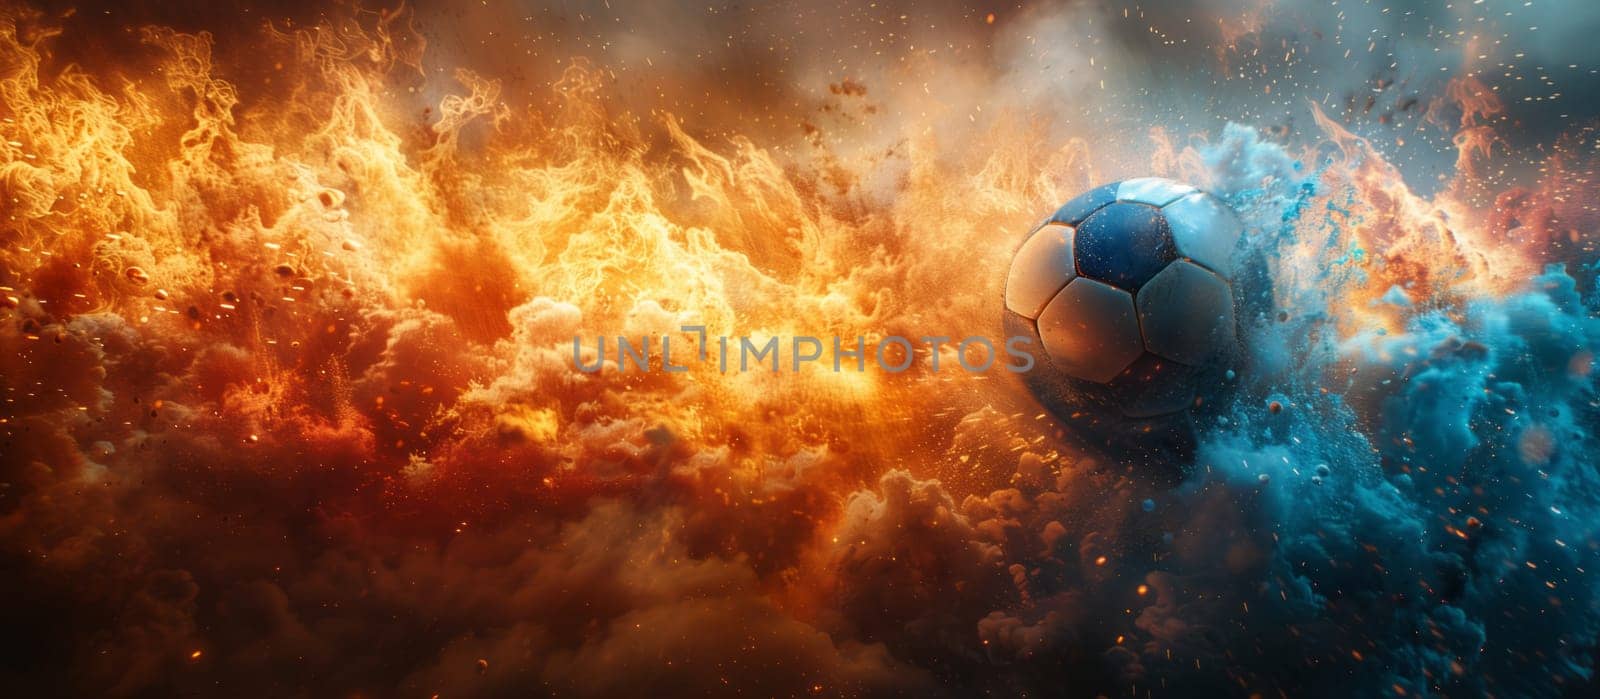 The soccer ball is engulfed in flames and smoke against the backdrop of a fiery sky. The intense heat creates a mesmerizing yet dangerous scene